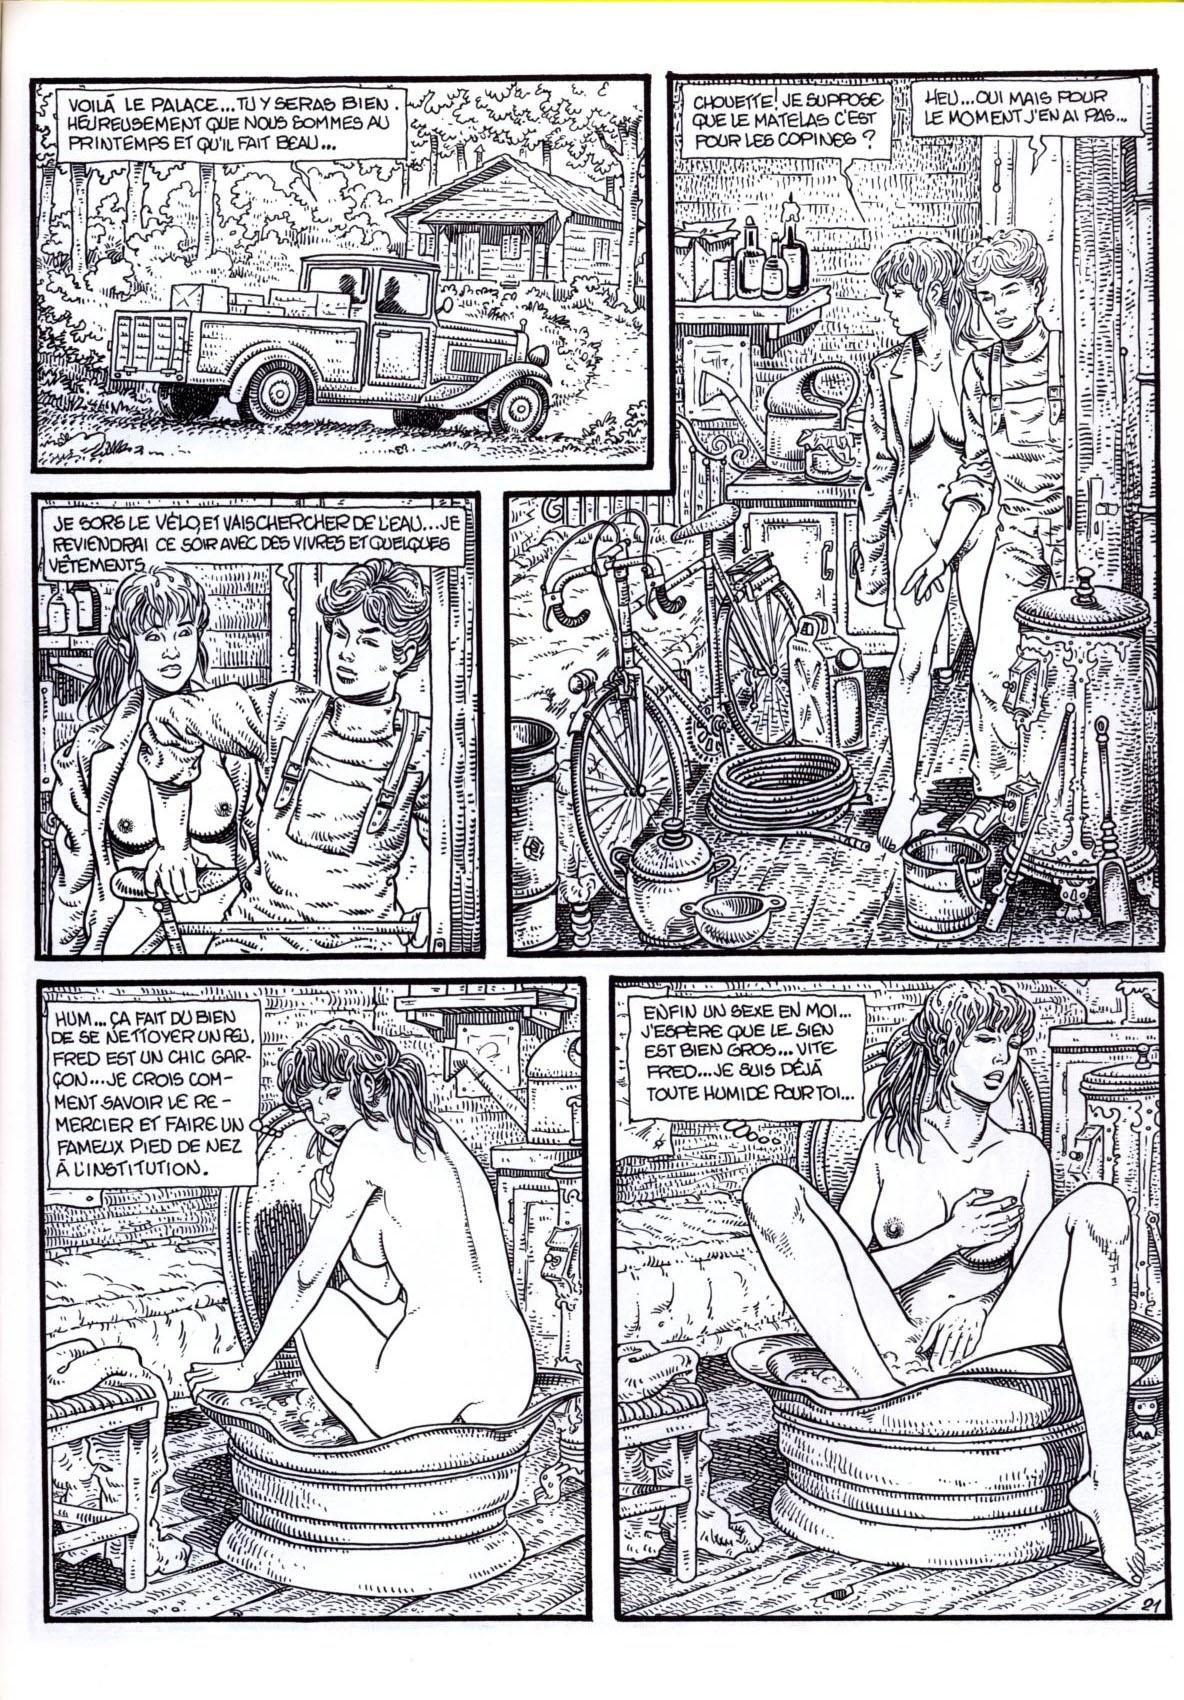 The Mary Magdalene Boarding School - Volume 3 numero d'image 23